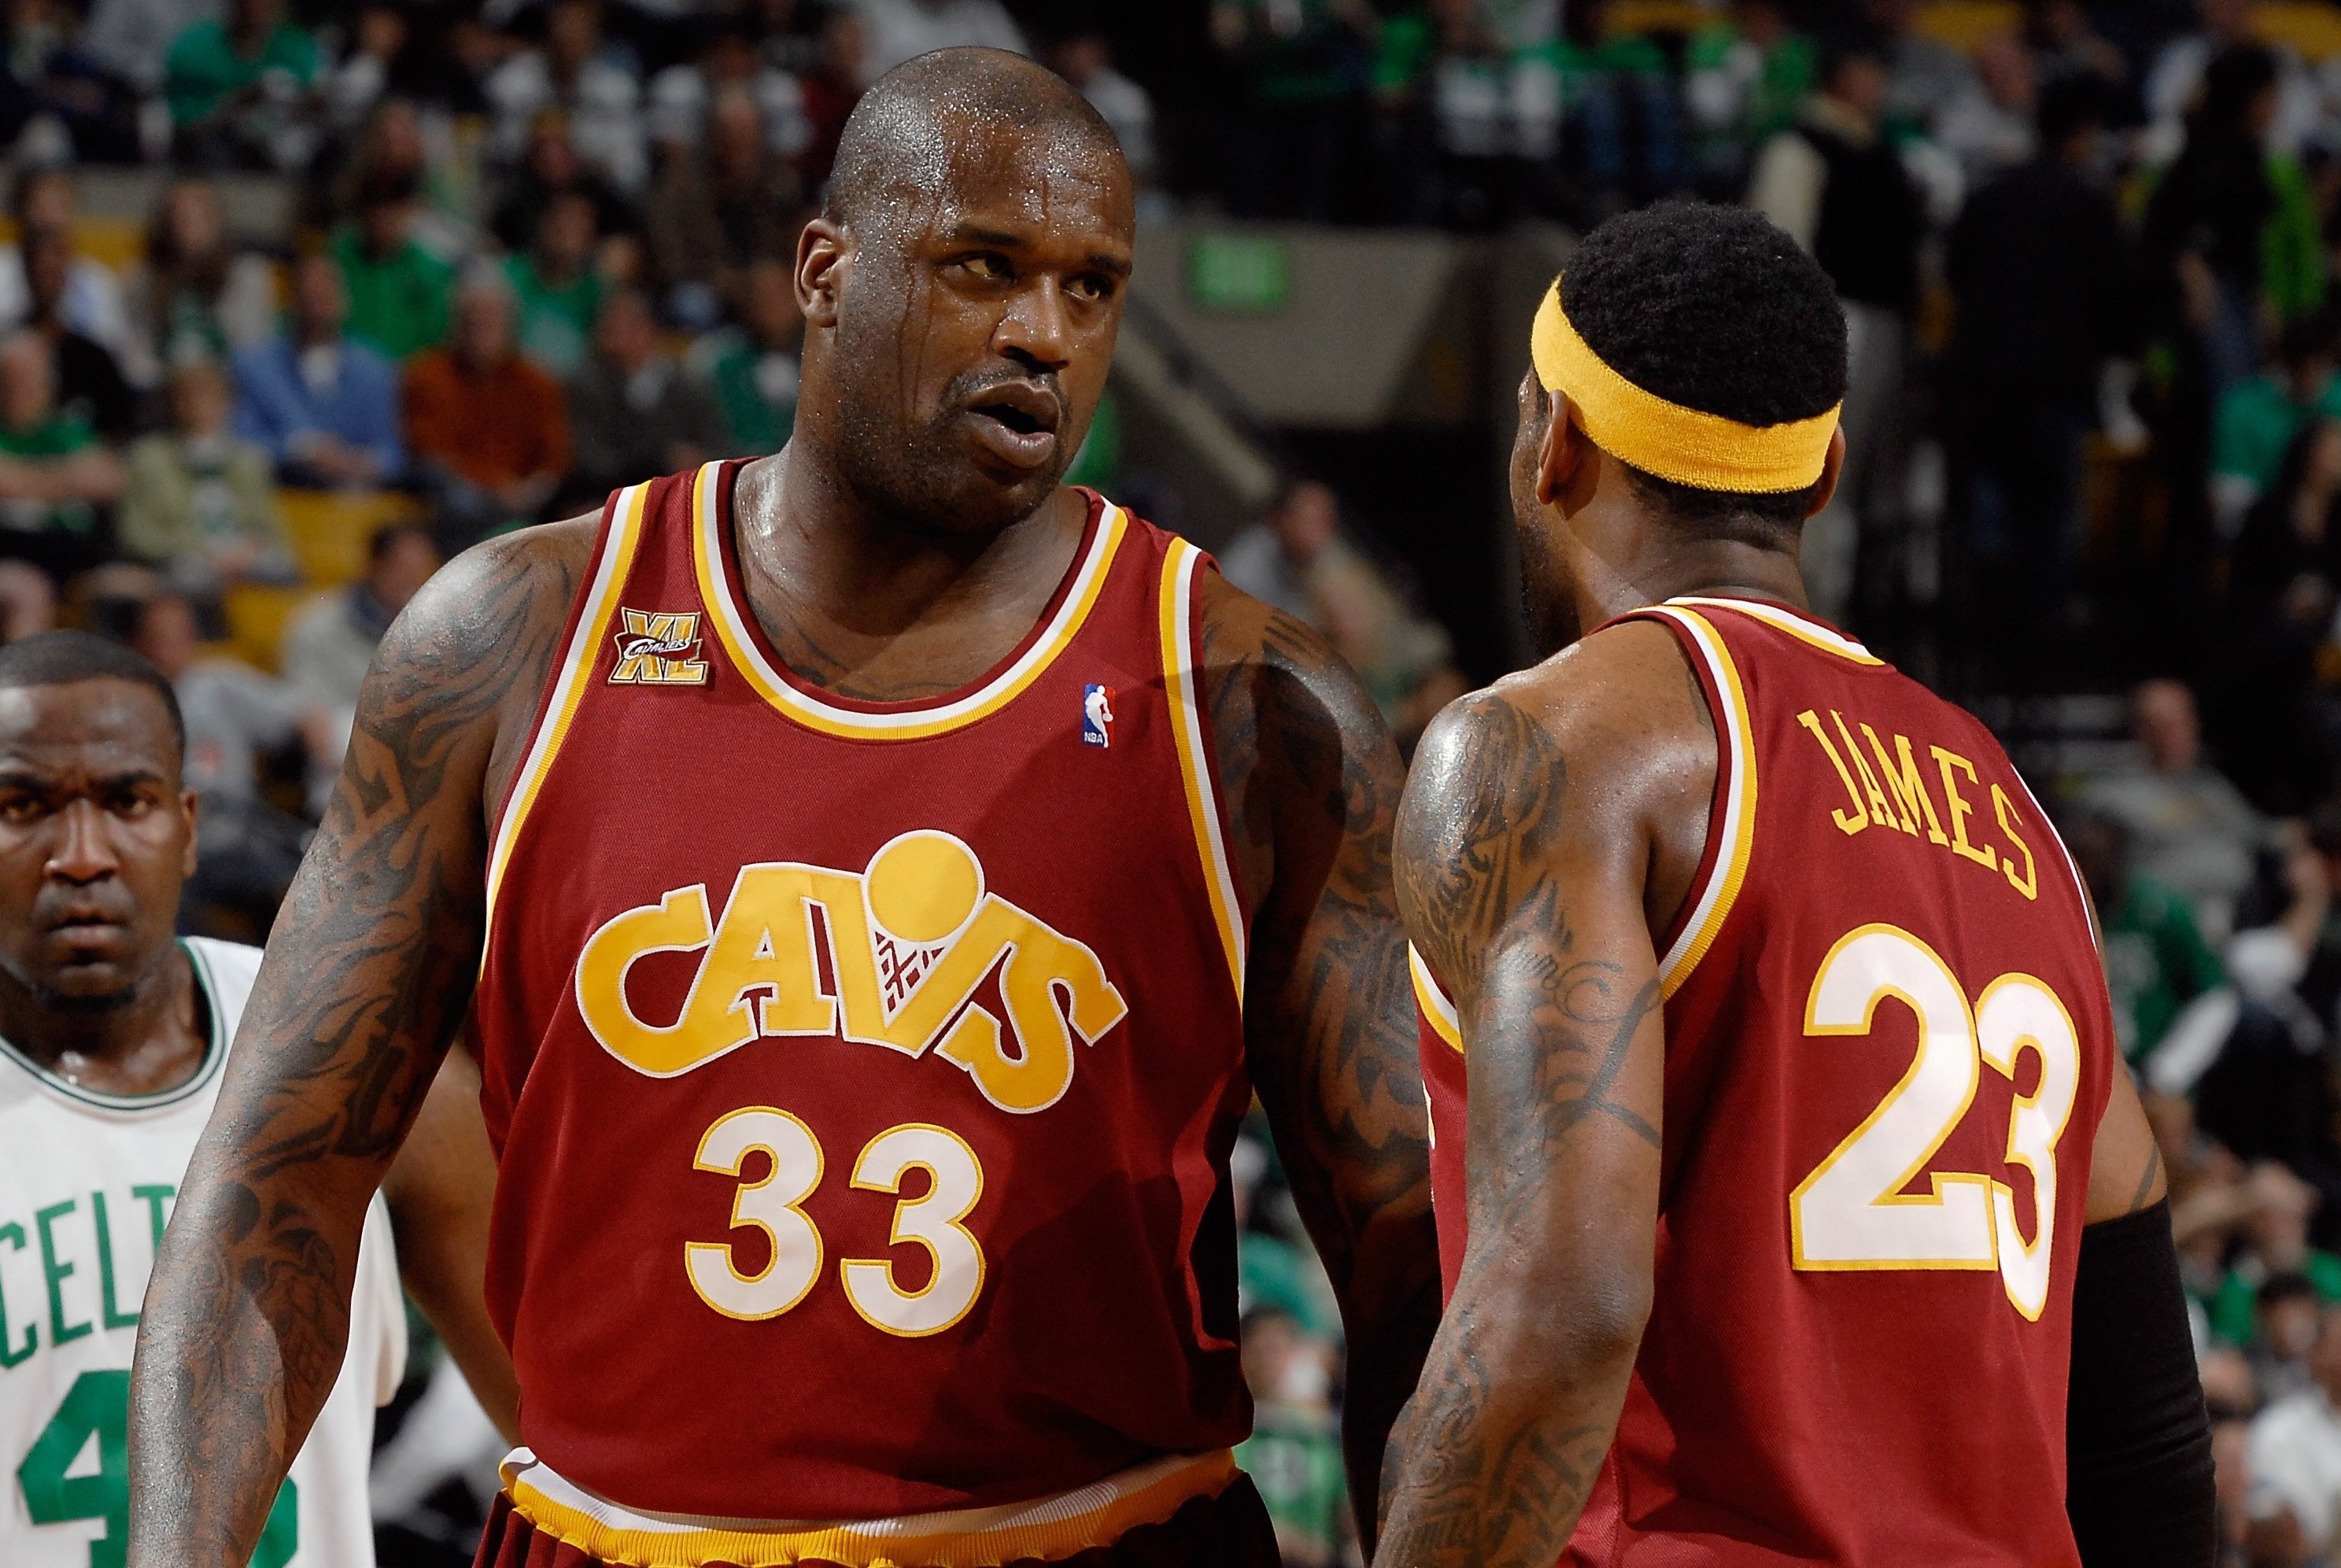 LeBron James' Jersey From 2013 NBA Finals Sells For $3.6 Million